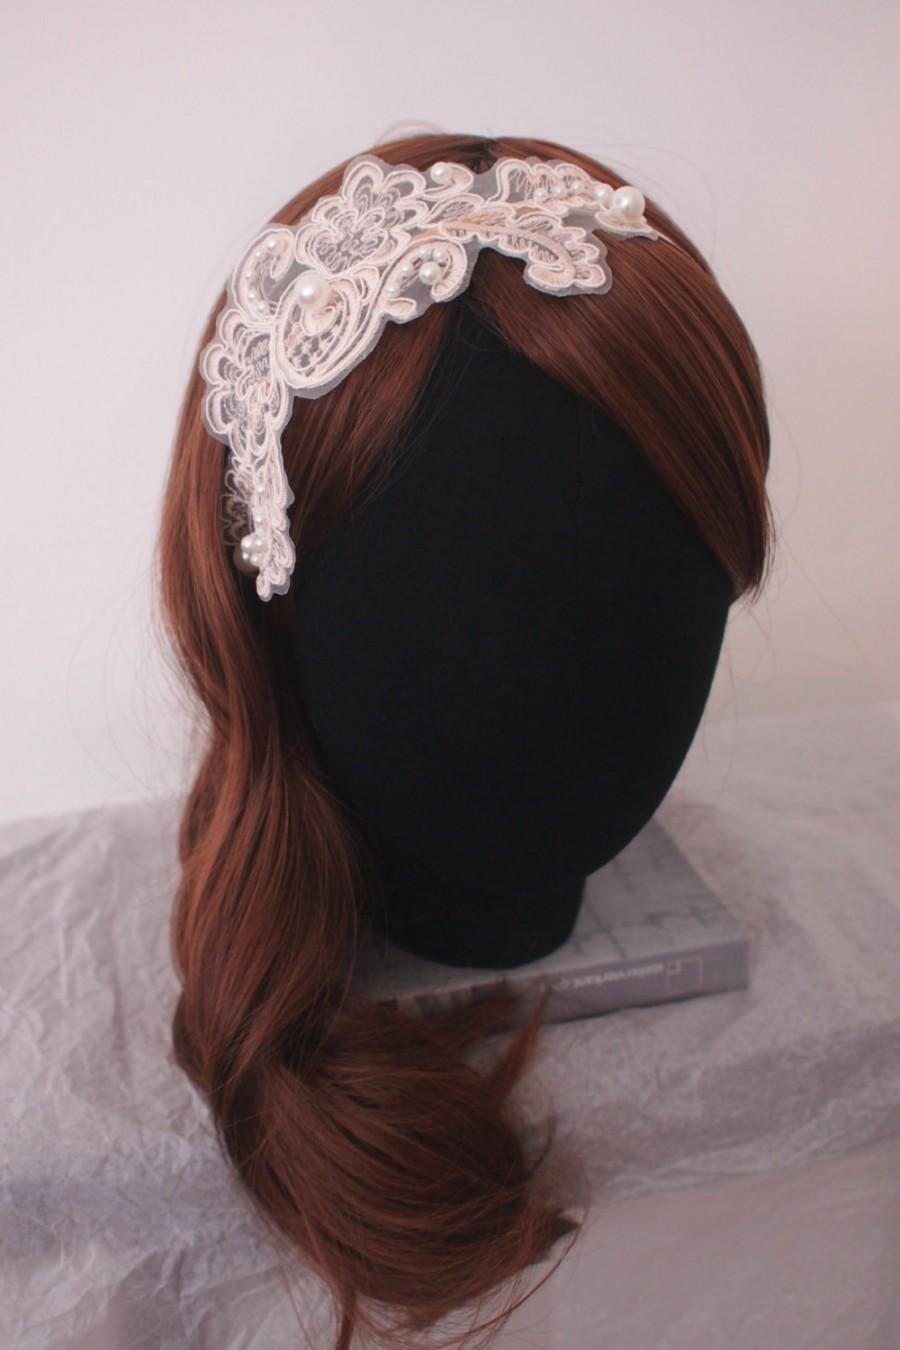 Wedding - 1920s' Victorian Style Wedding Headpiece -- Hand Embroidered Pearls on Lace Headband -- for Bridal /Bridesmaid / Formal Party